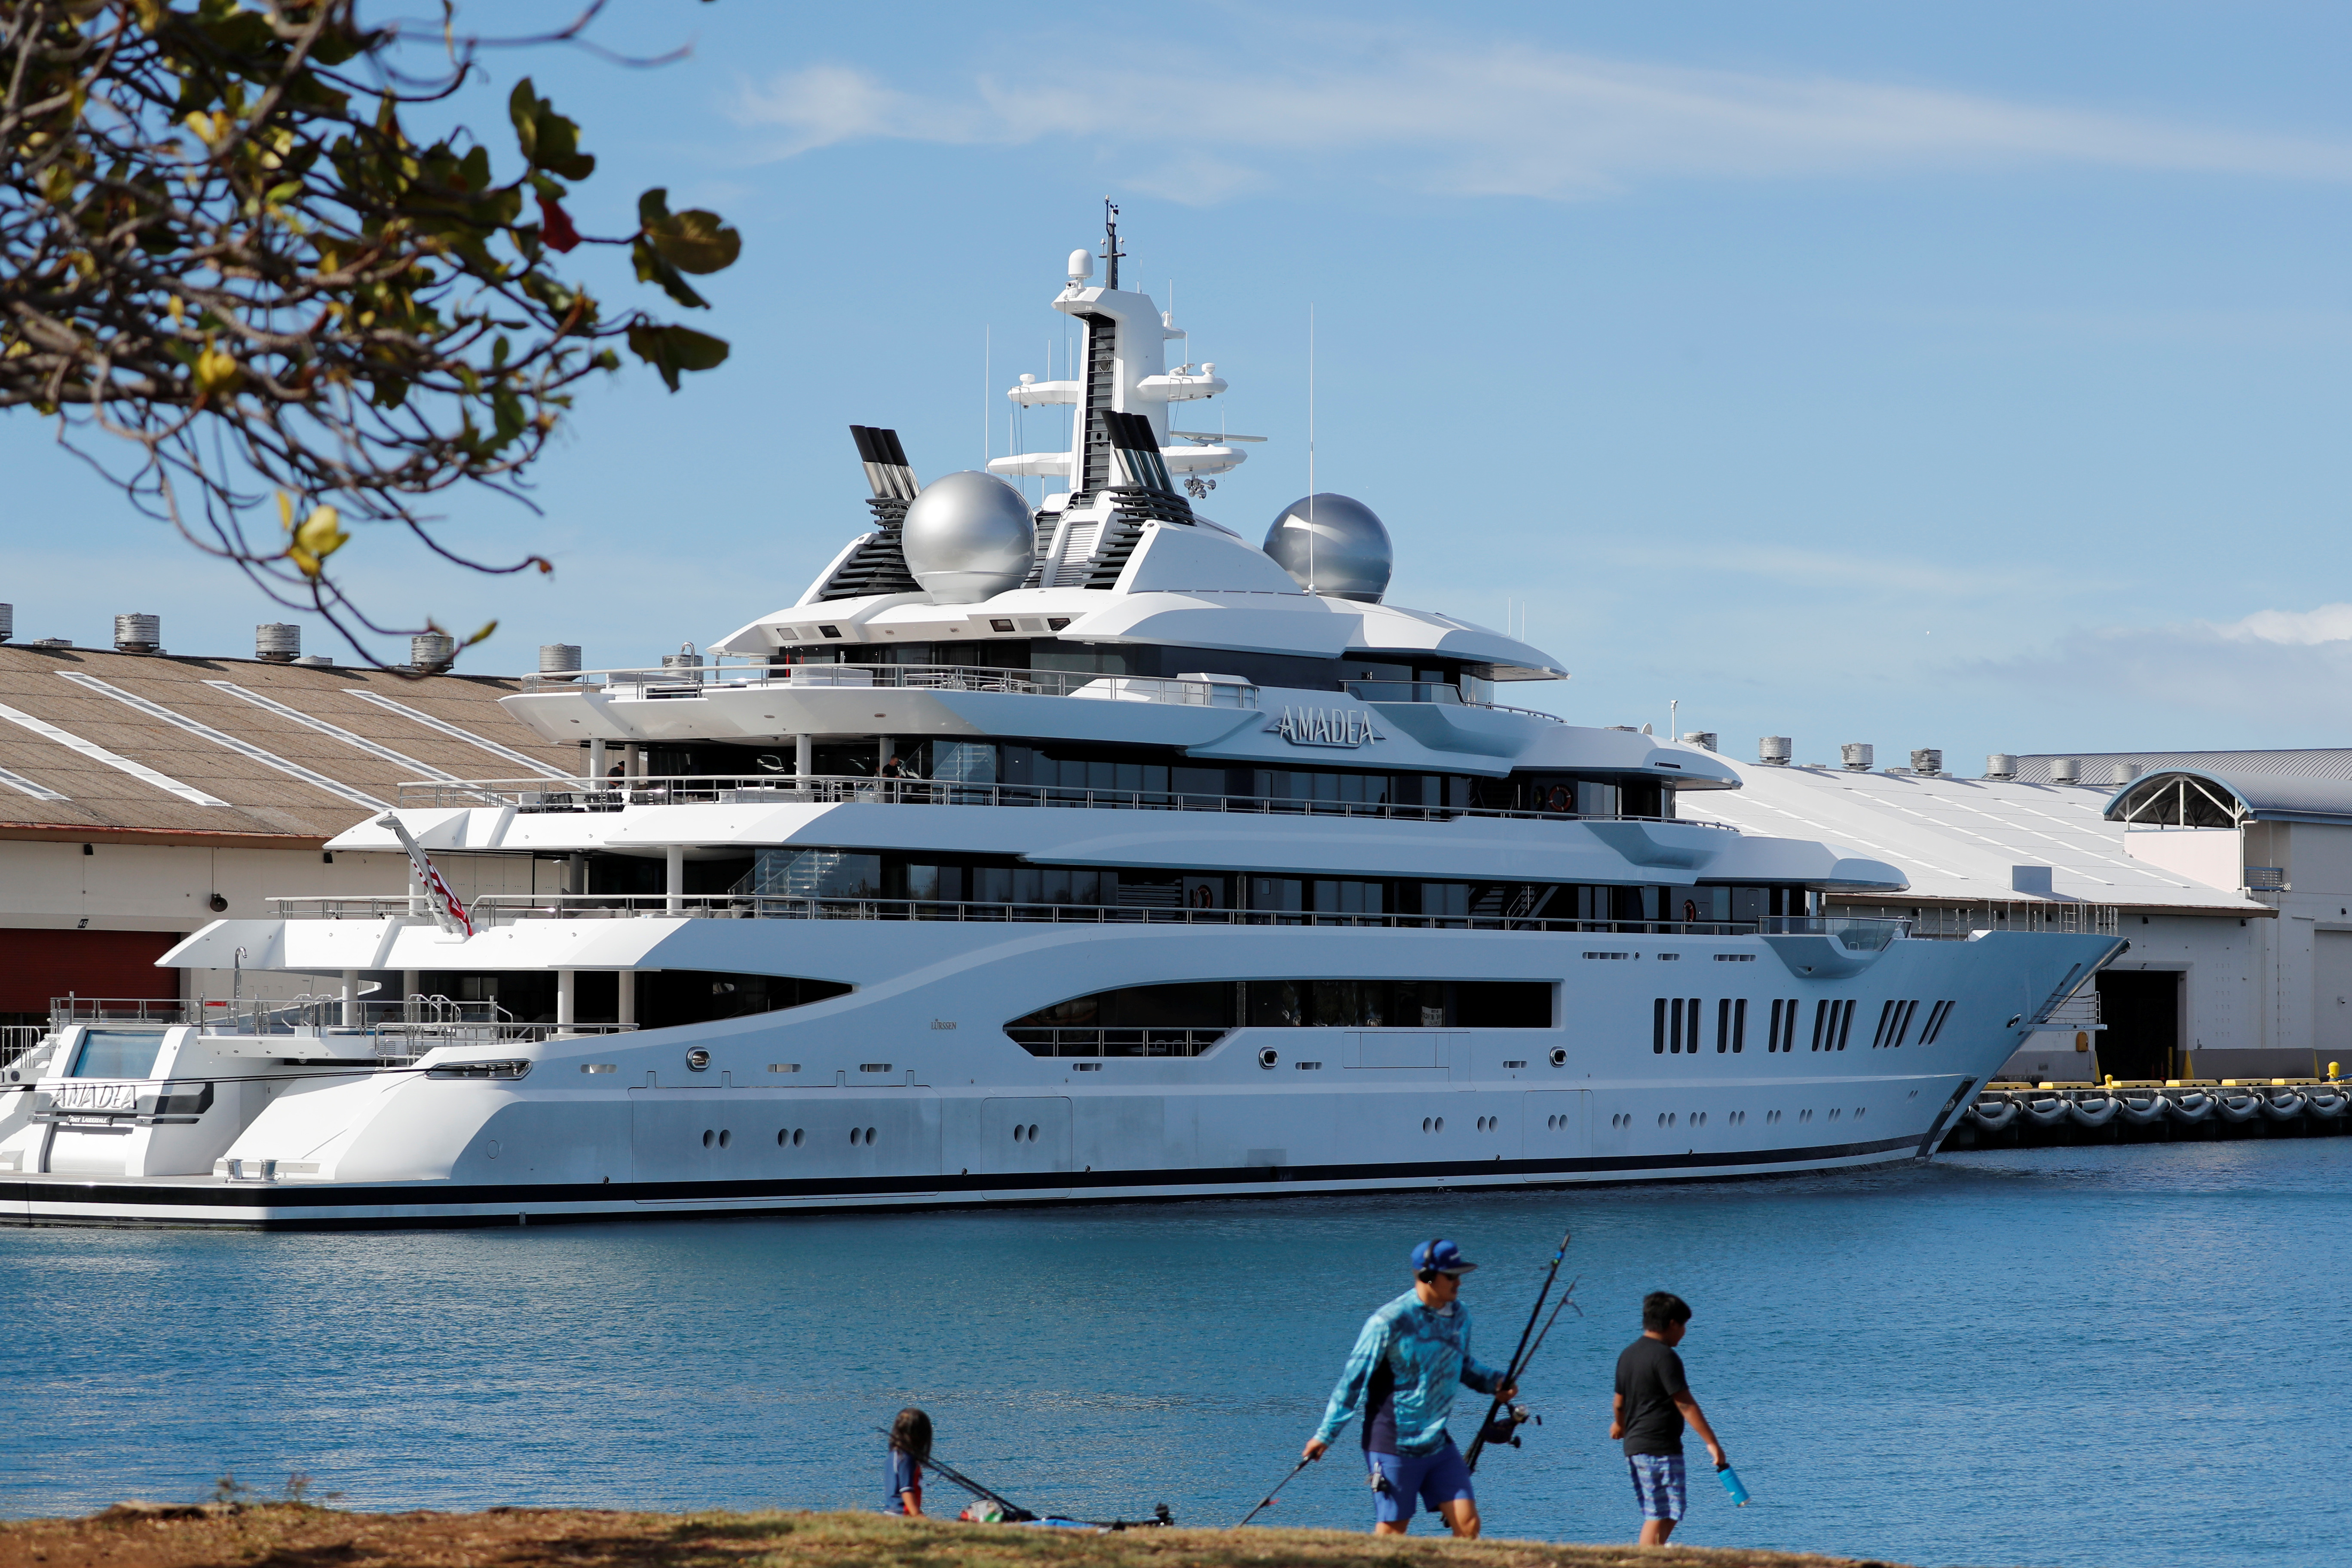 Fishermen set up their gear across the harbor from the Russian-owned super yacht Amadea seized in Fiji by American law enforcement, in Honolulu